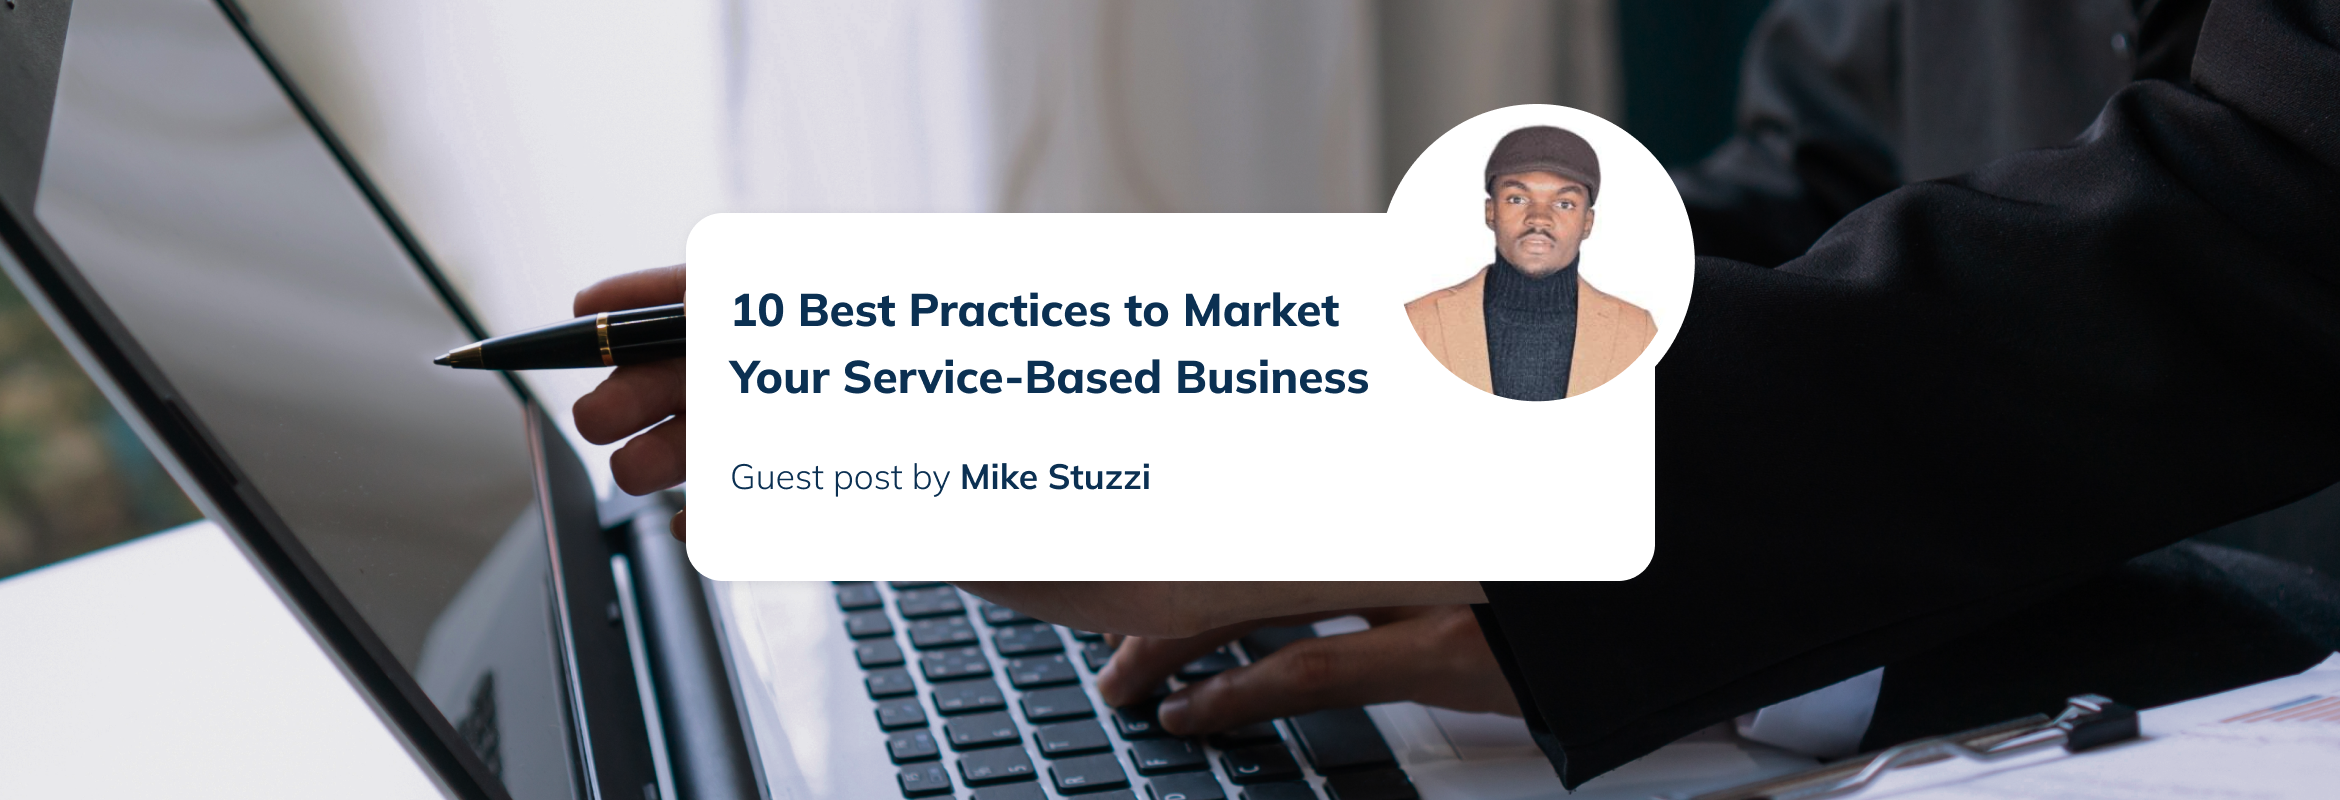 Marketing your service-based business